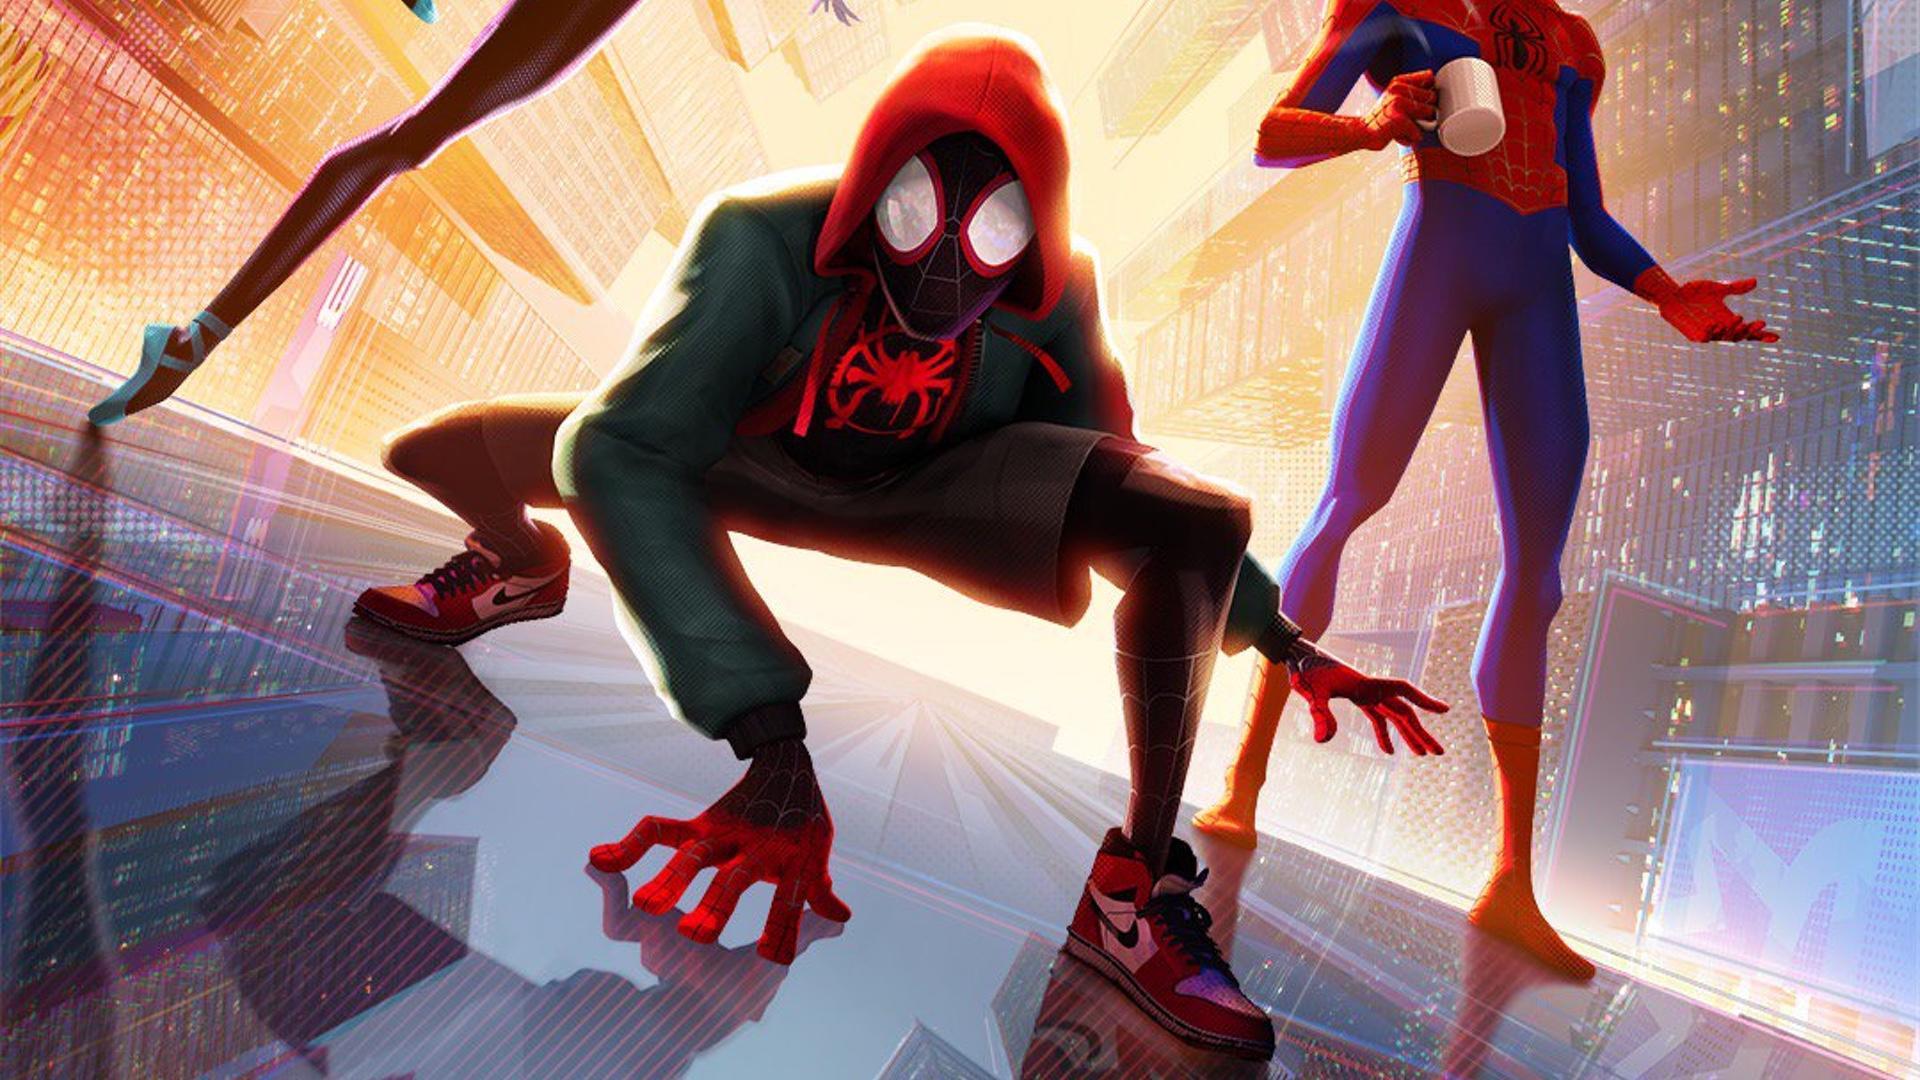 legal soul gain Spider-Man: Across the Spider-Verse Air Jordan 1 Shoes Reveal Release Date